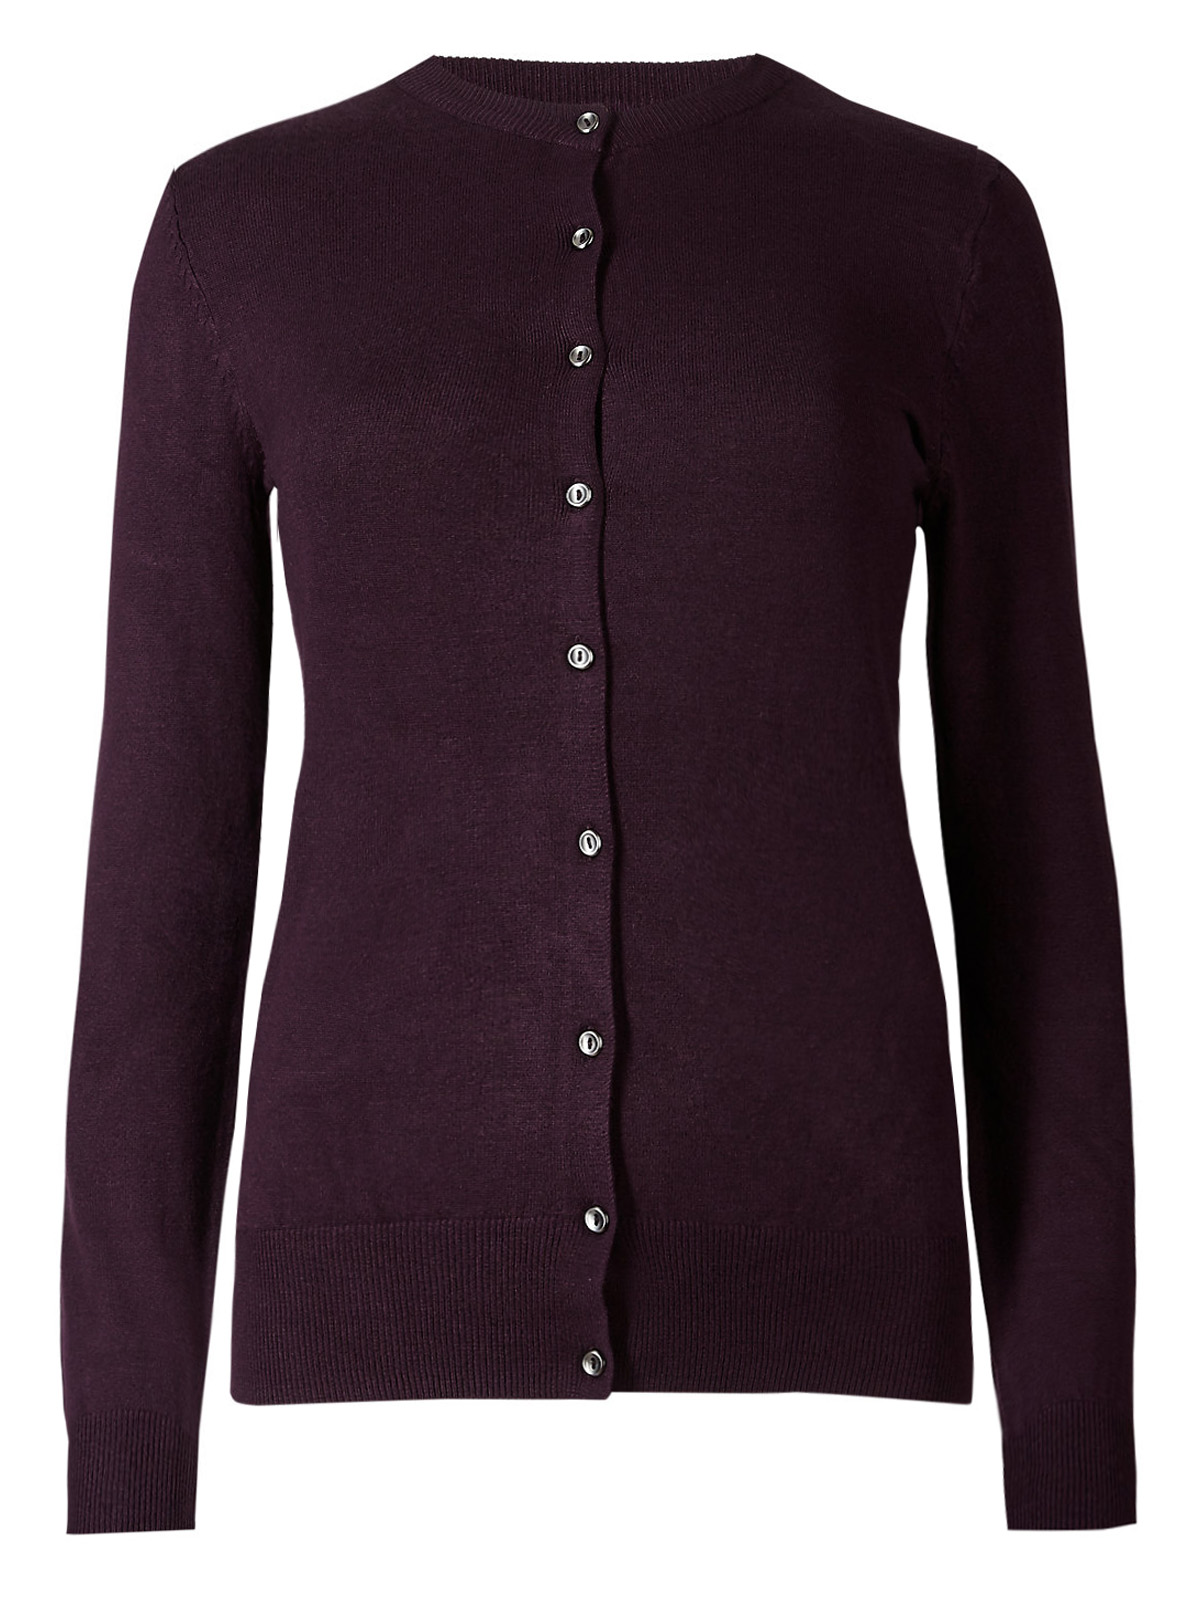 Marks and Spencer - - M&5 ASSORTED Round Neck Button Through Cardigan ...